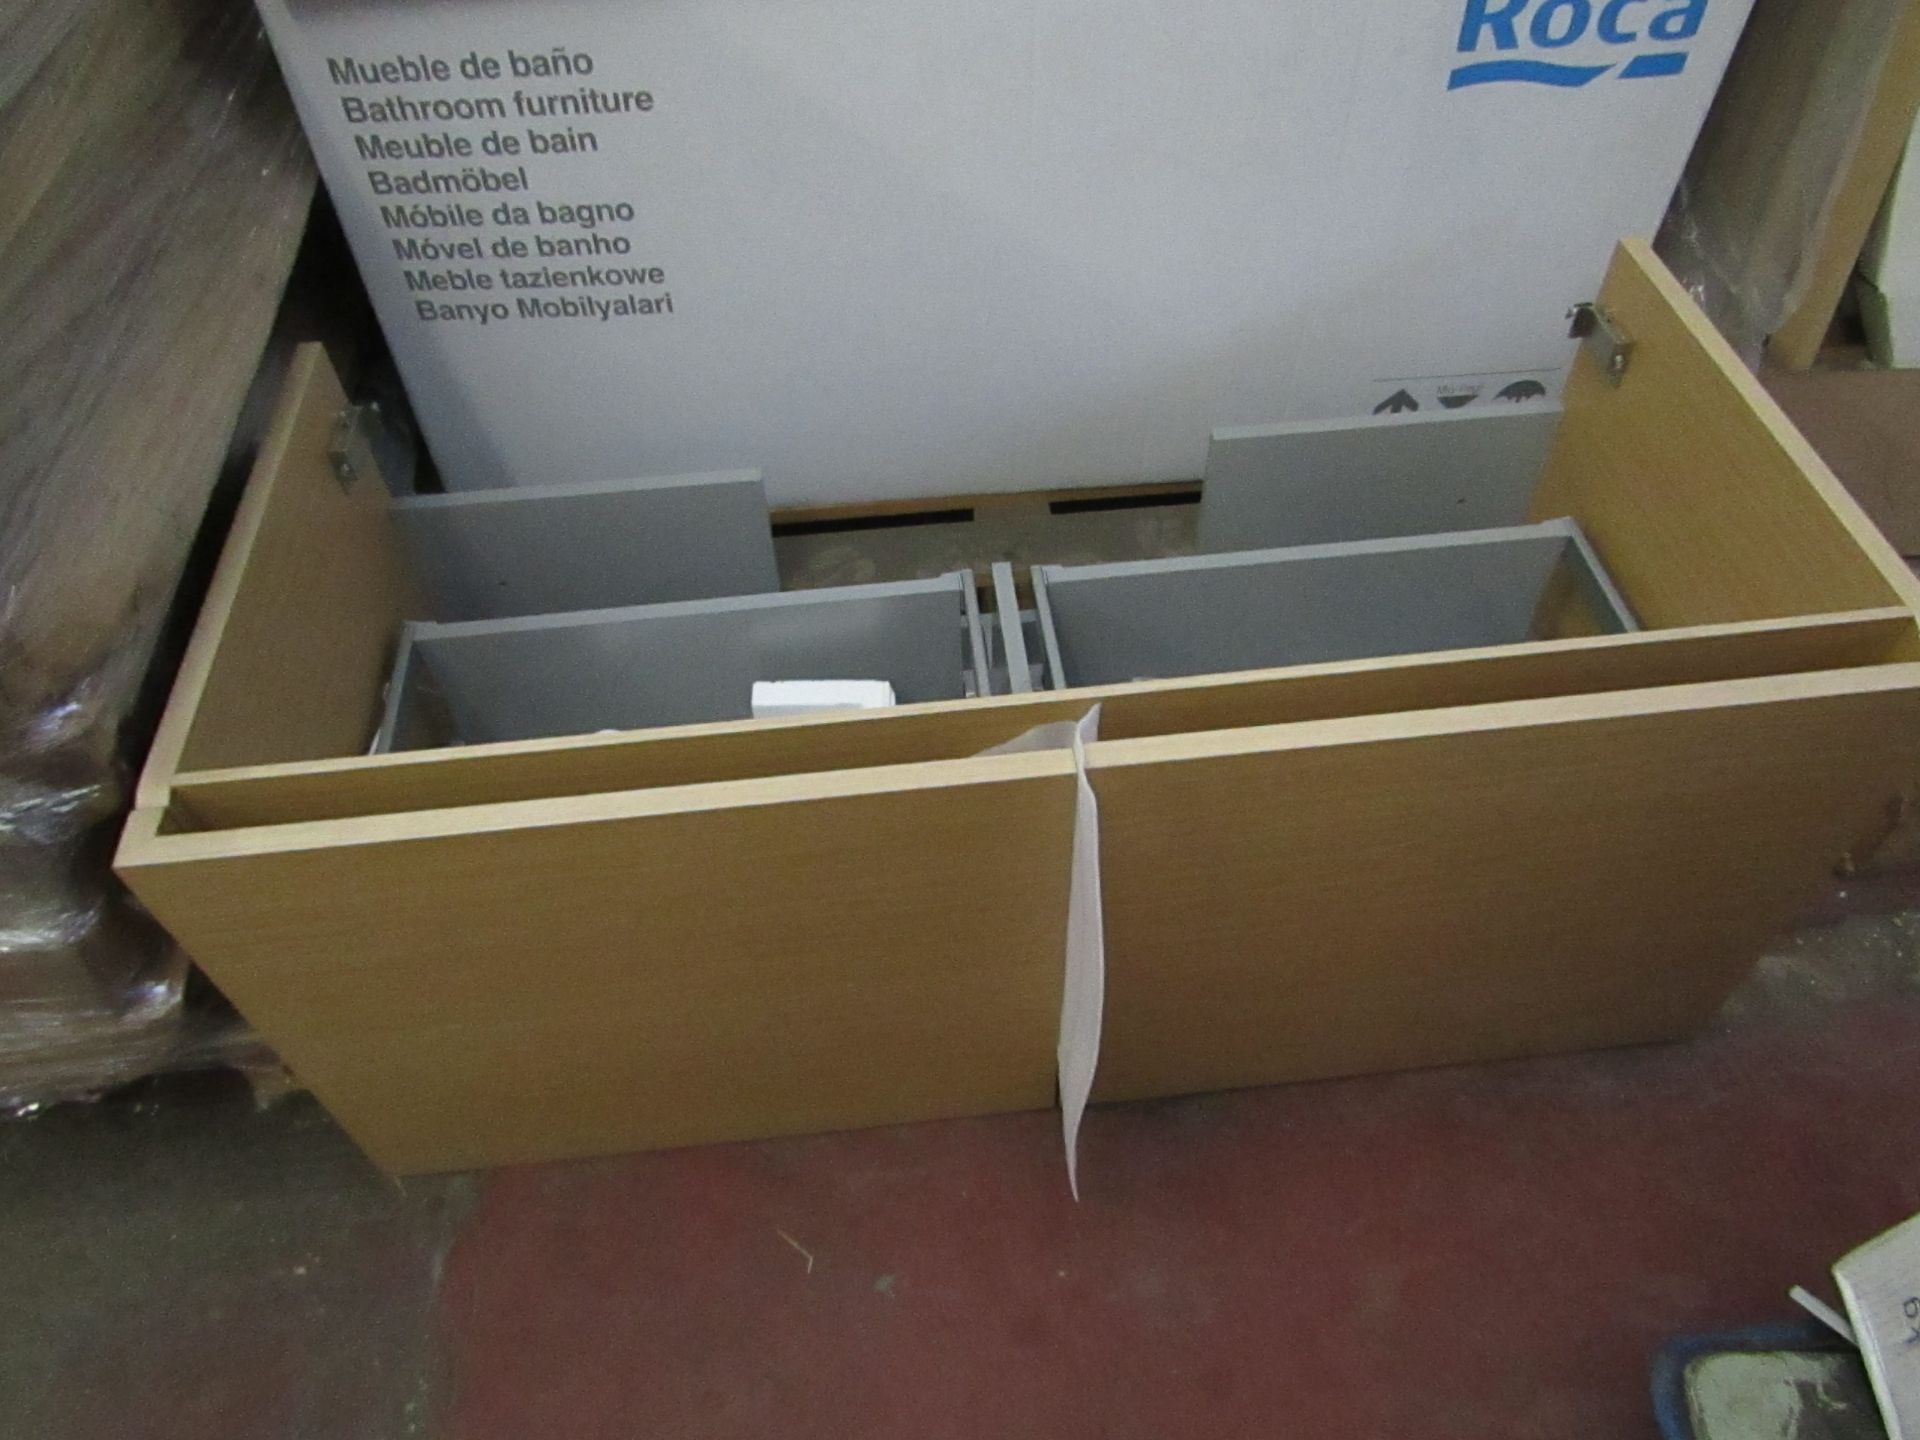 Roca Stratum 1085mm light up vanity bathroom unit with built in lighting, new and boxed. RRP Circa